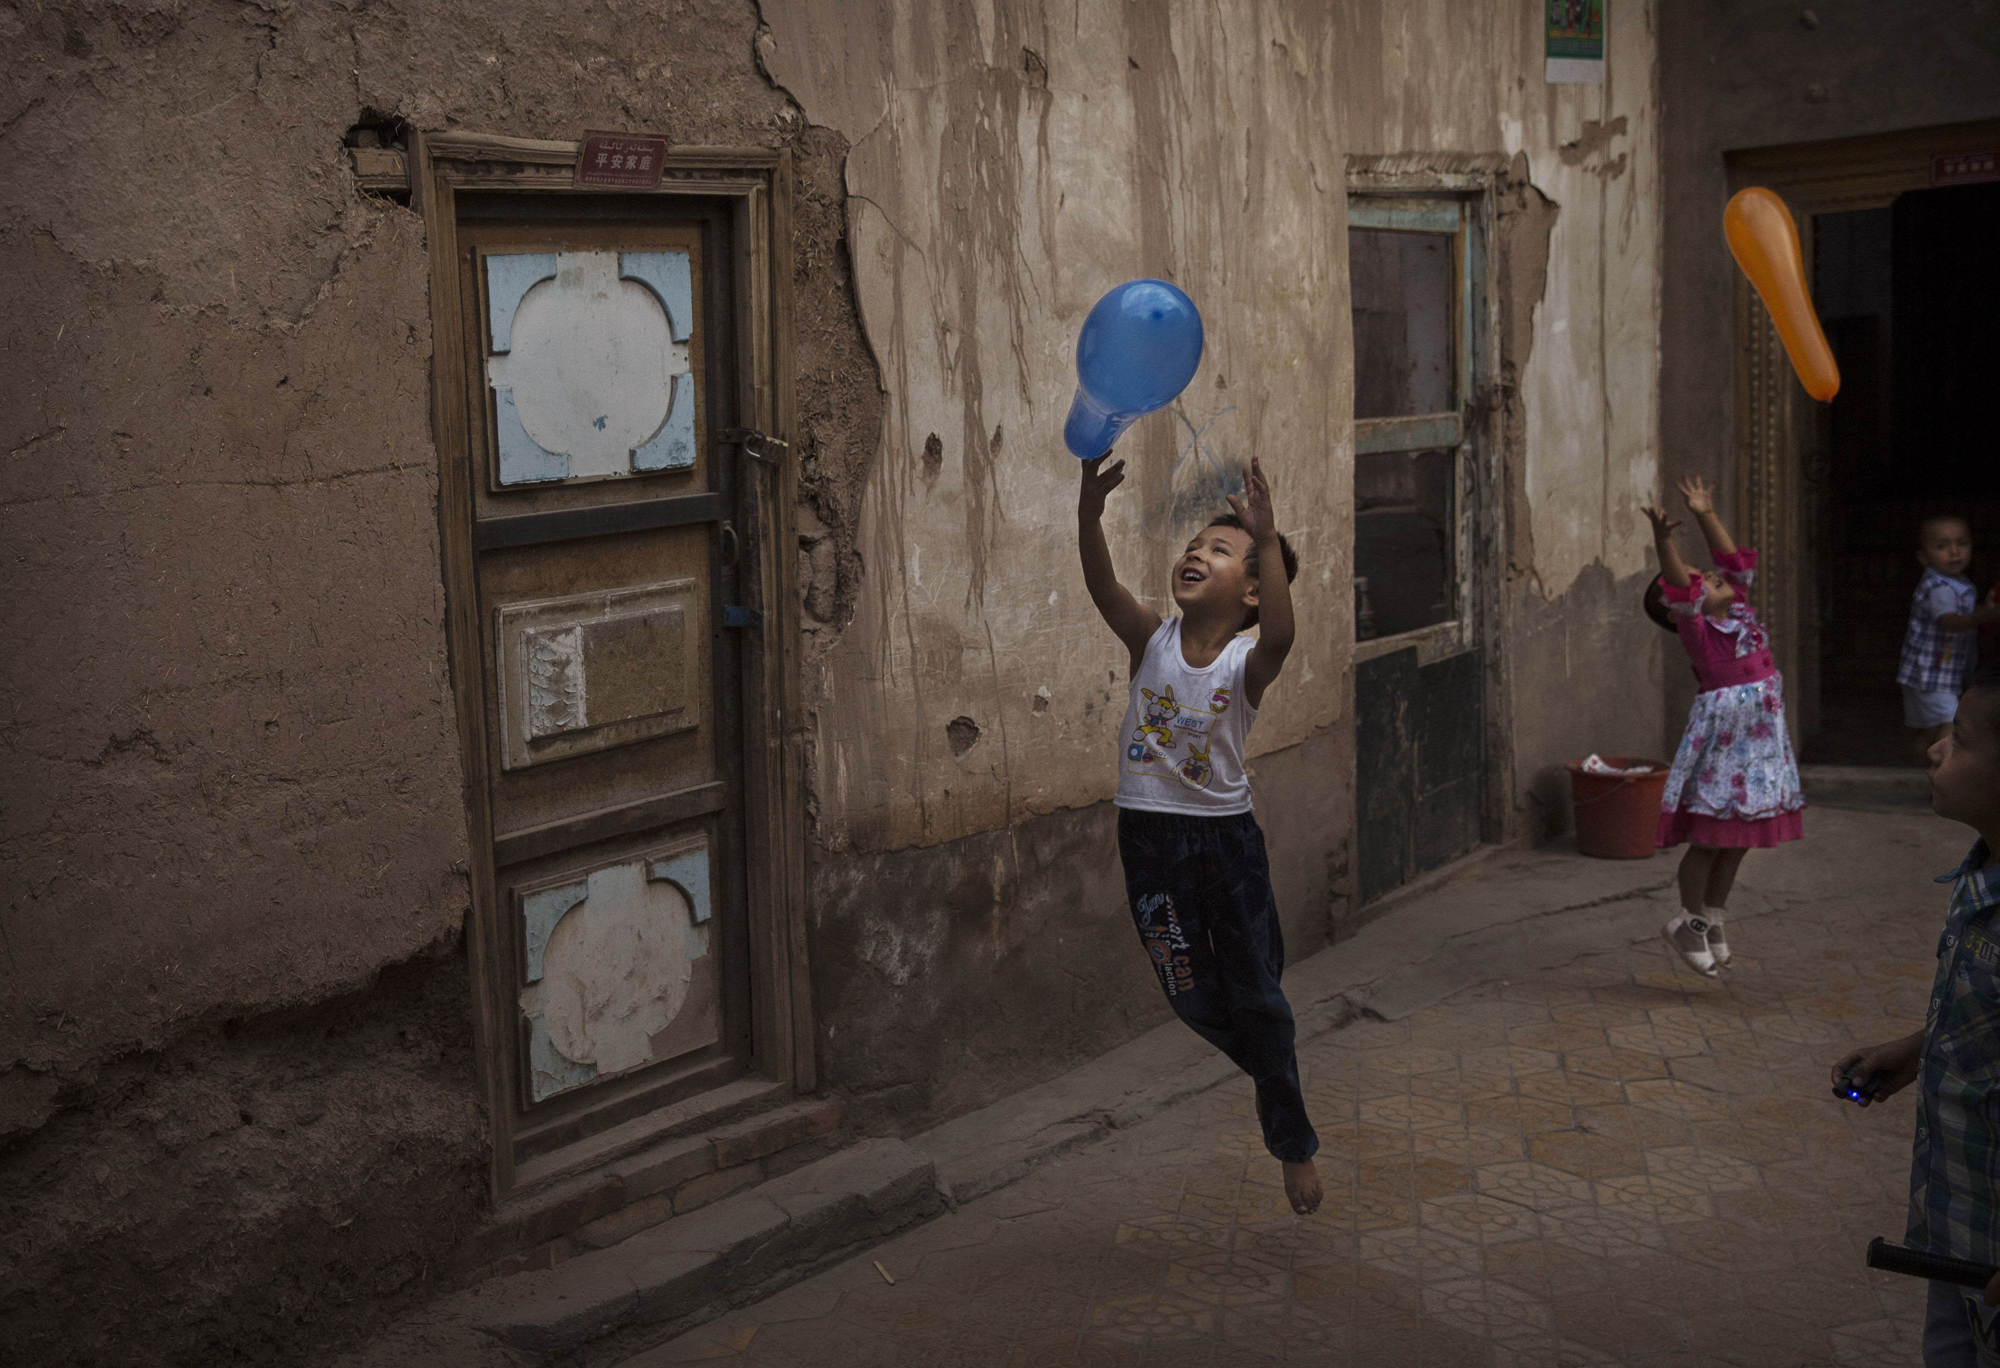 Uyghur children play with balloons on the Eid holiday on July 29, 2014 in alleyway in old Kashgar.